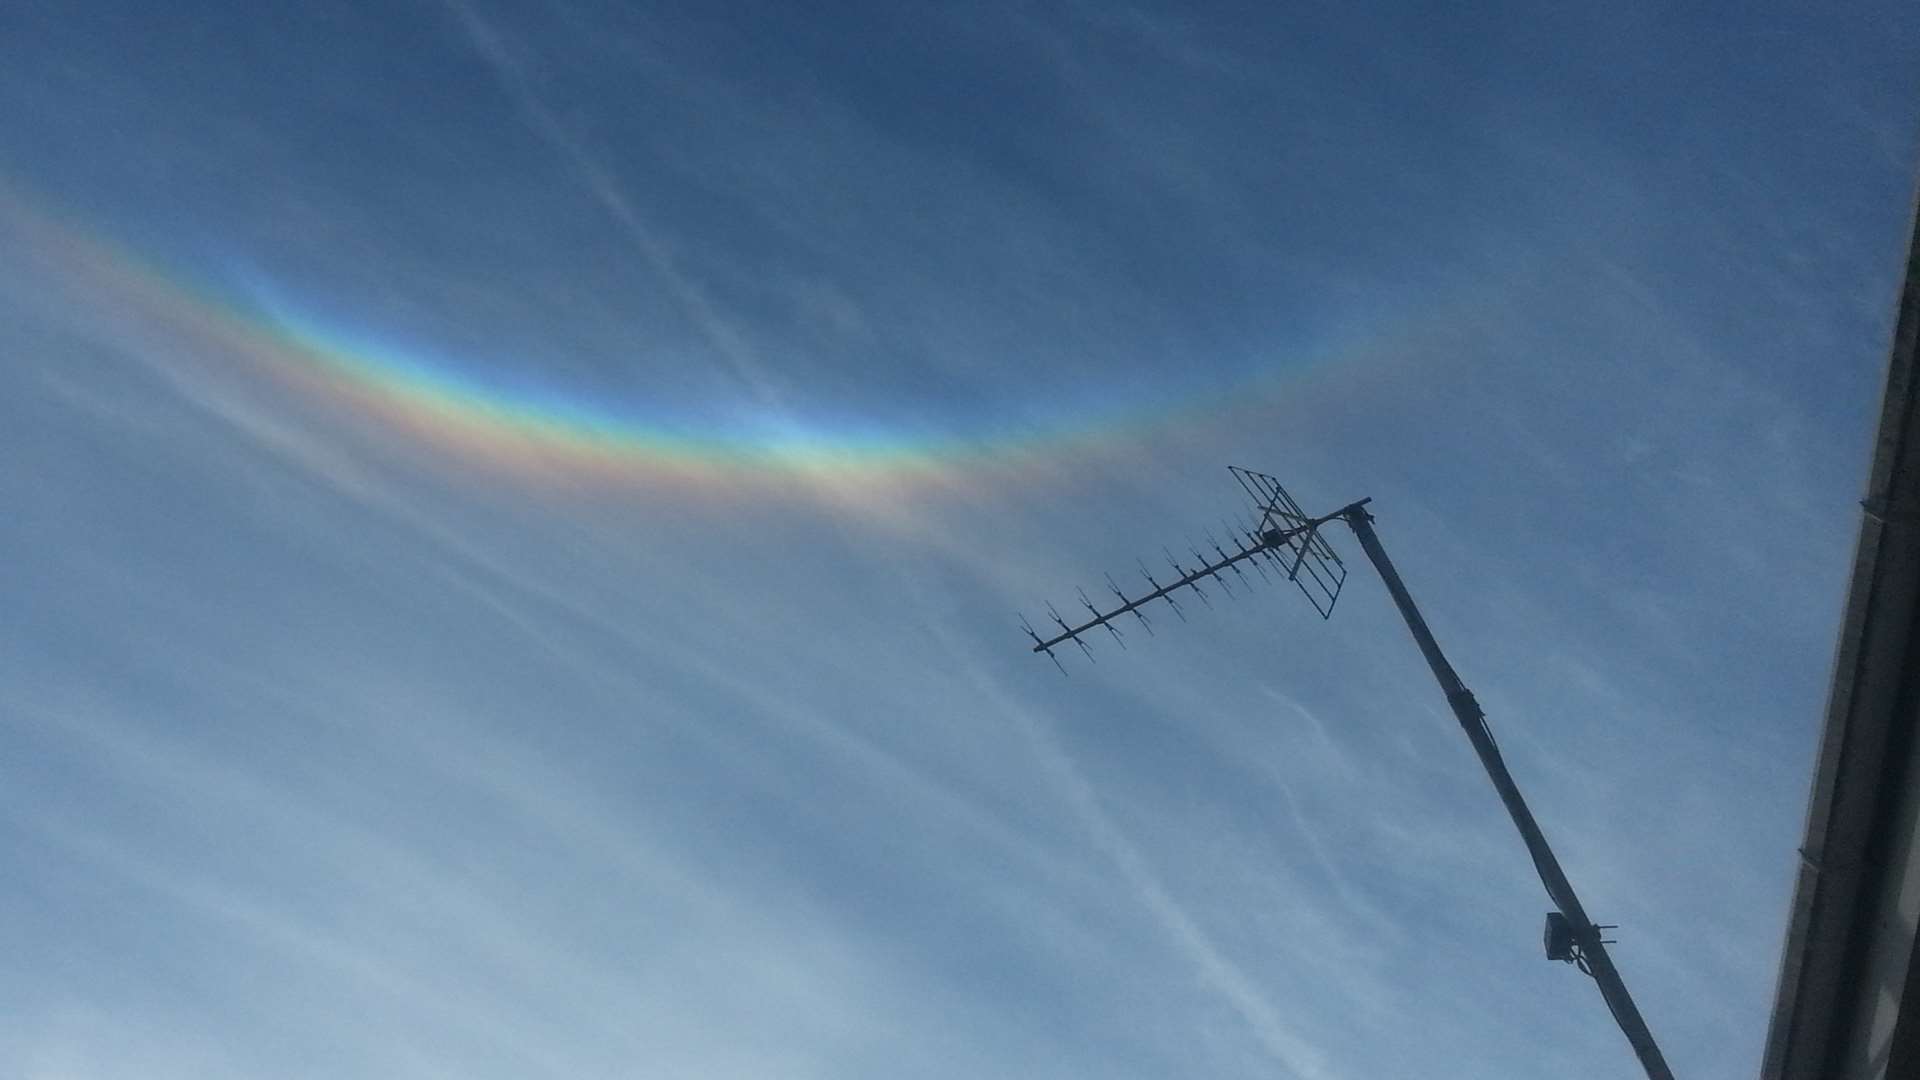 The "upside-down rainbow" over Willesborough in Ashford. Picture: Kelly Taylor